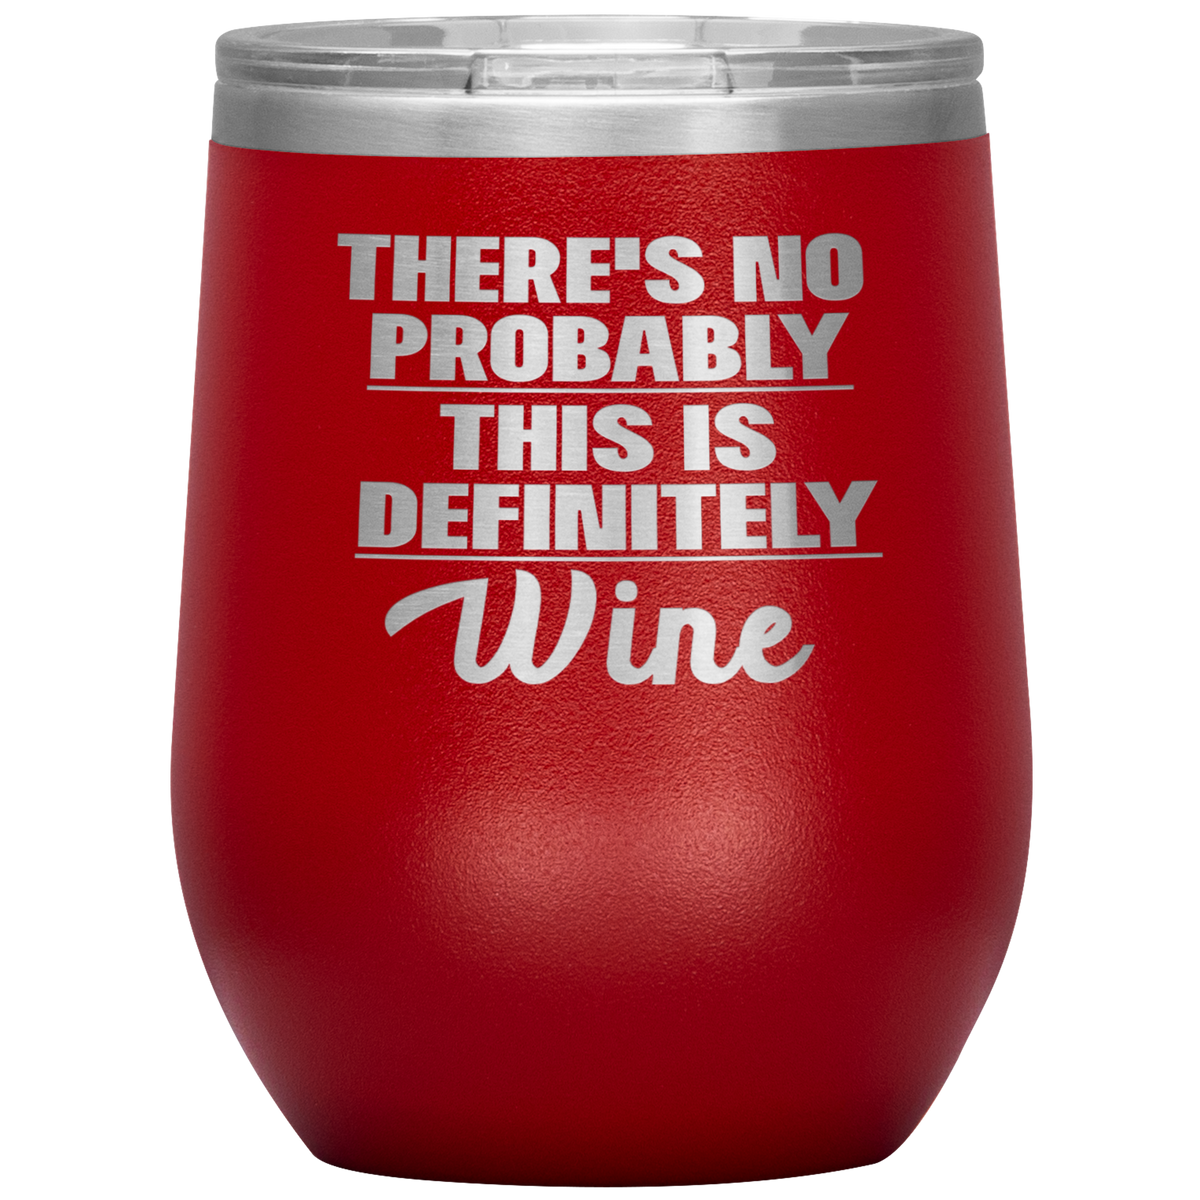 Probably Wine Funny Tumbler This is Definitely WIne